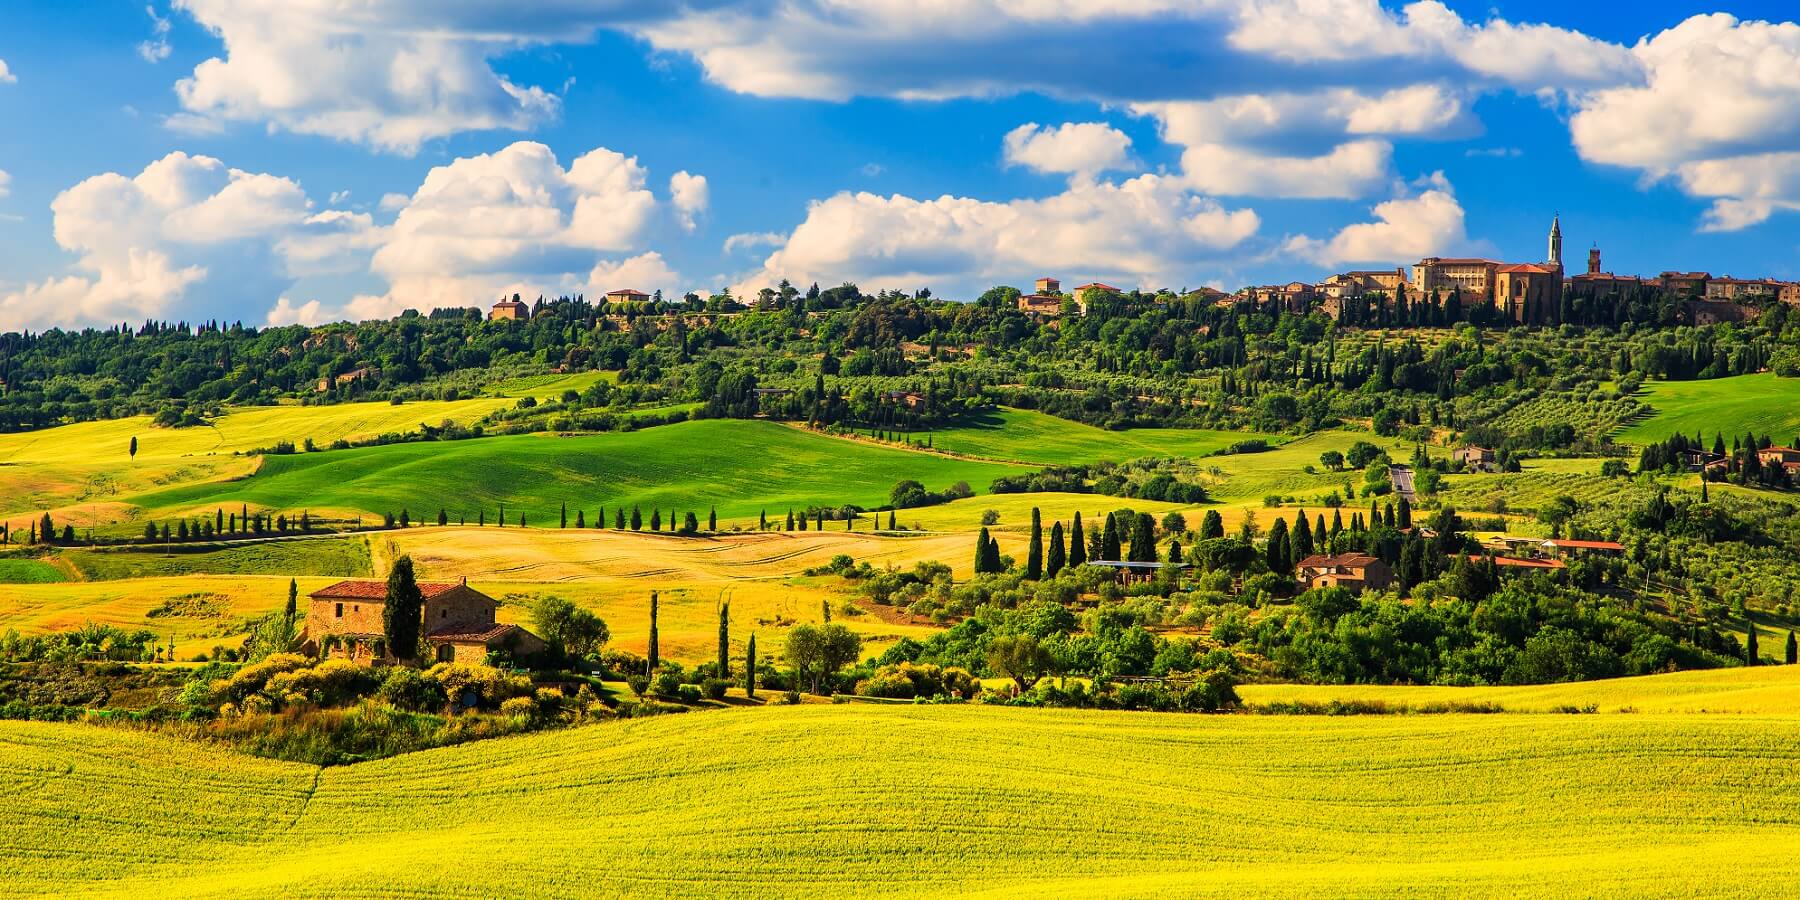 During the springtime in Tuscany, the colors are stunning